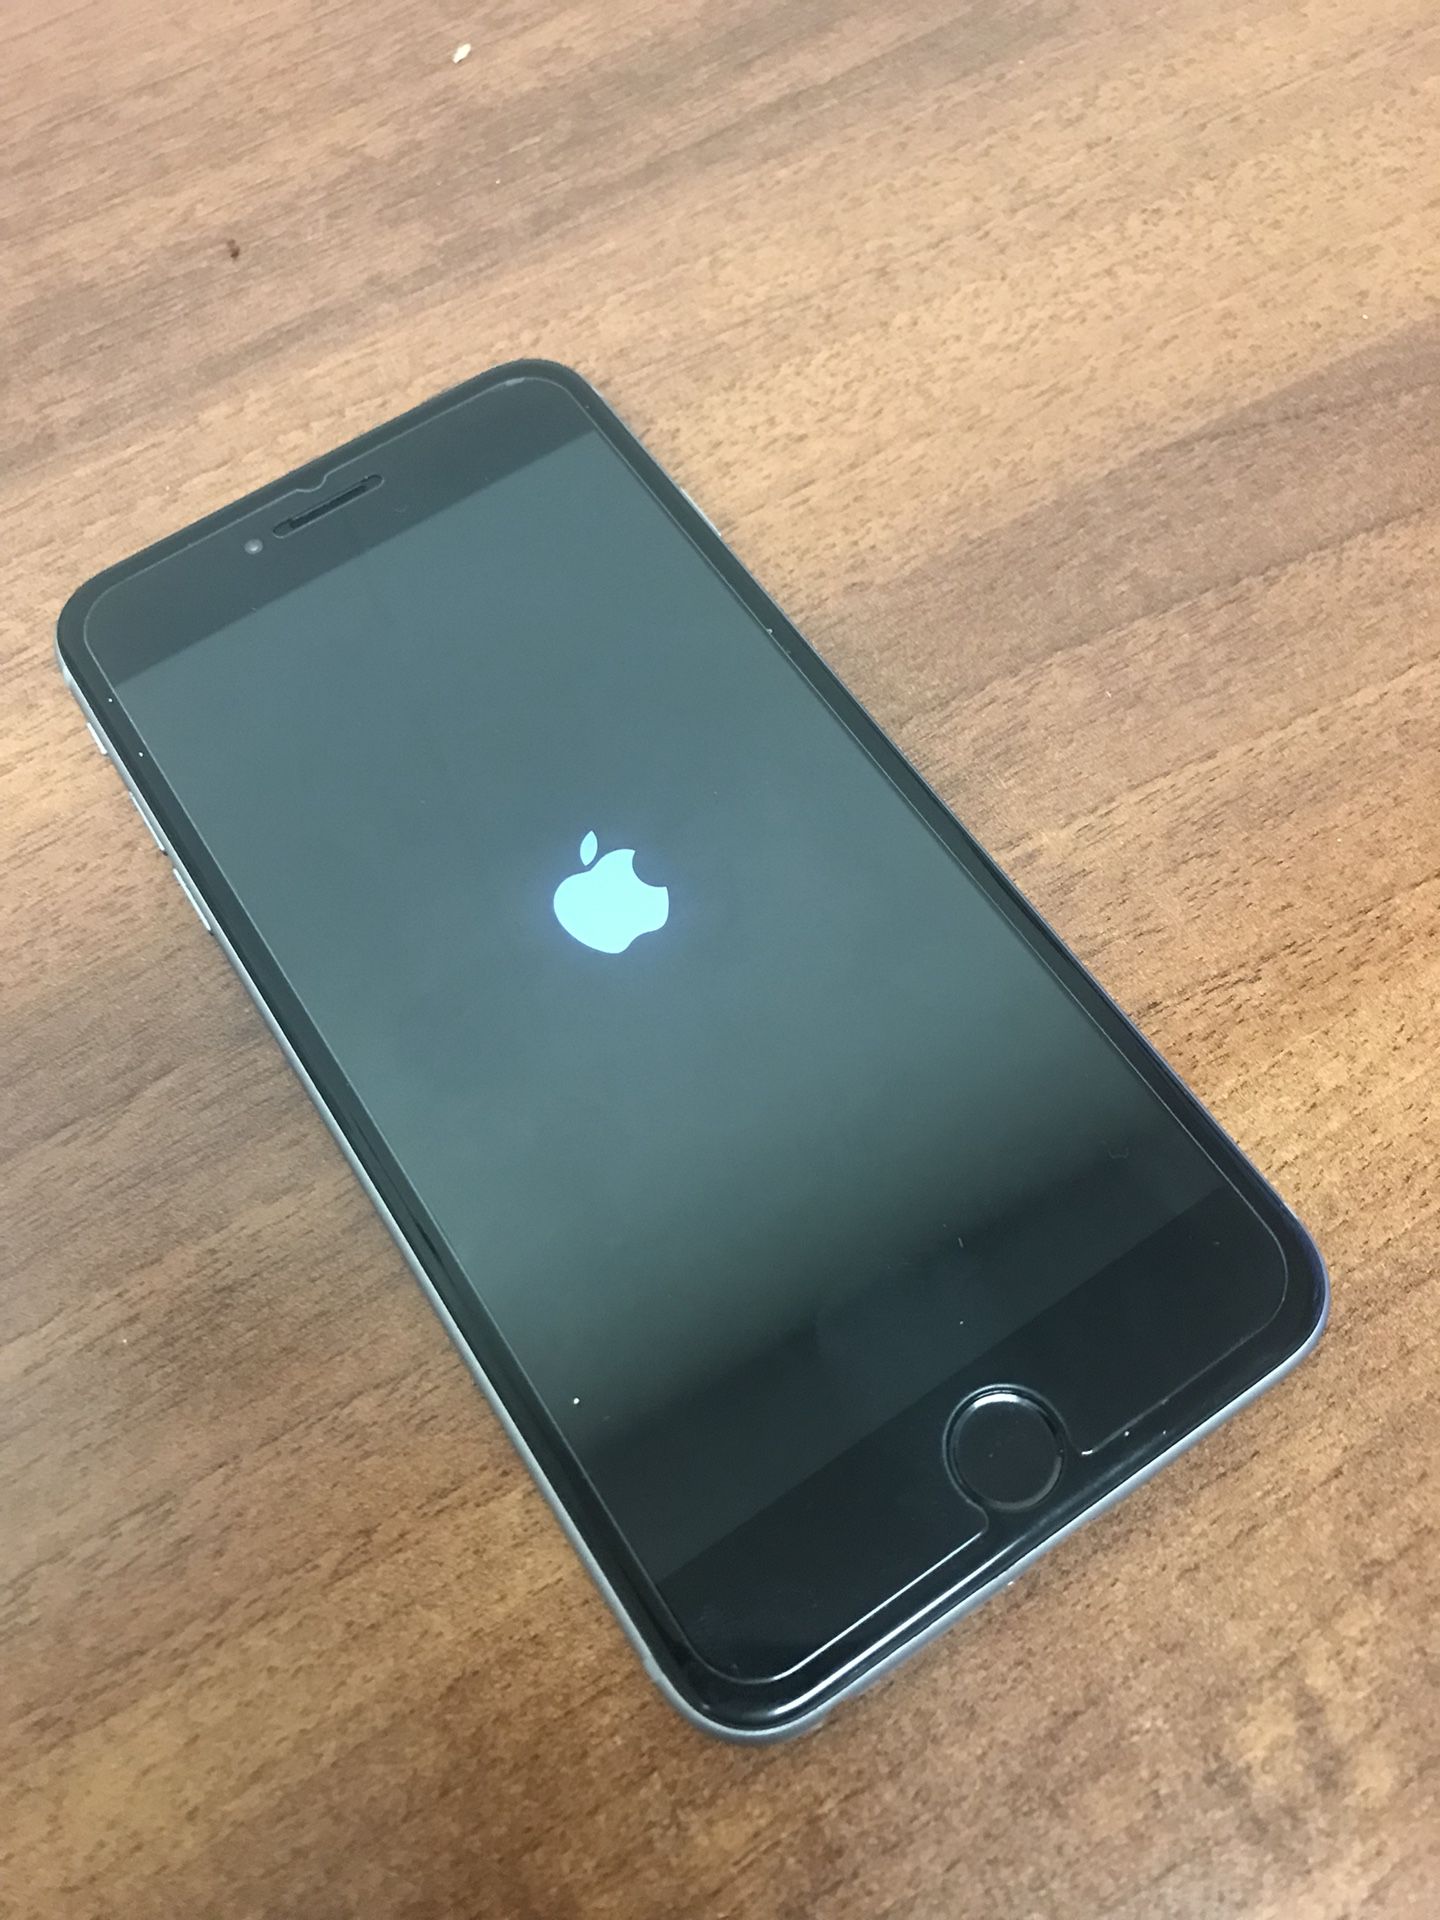 iPhone 6 Plus very good condition used normal wear